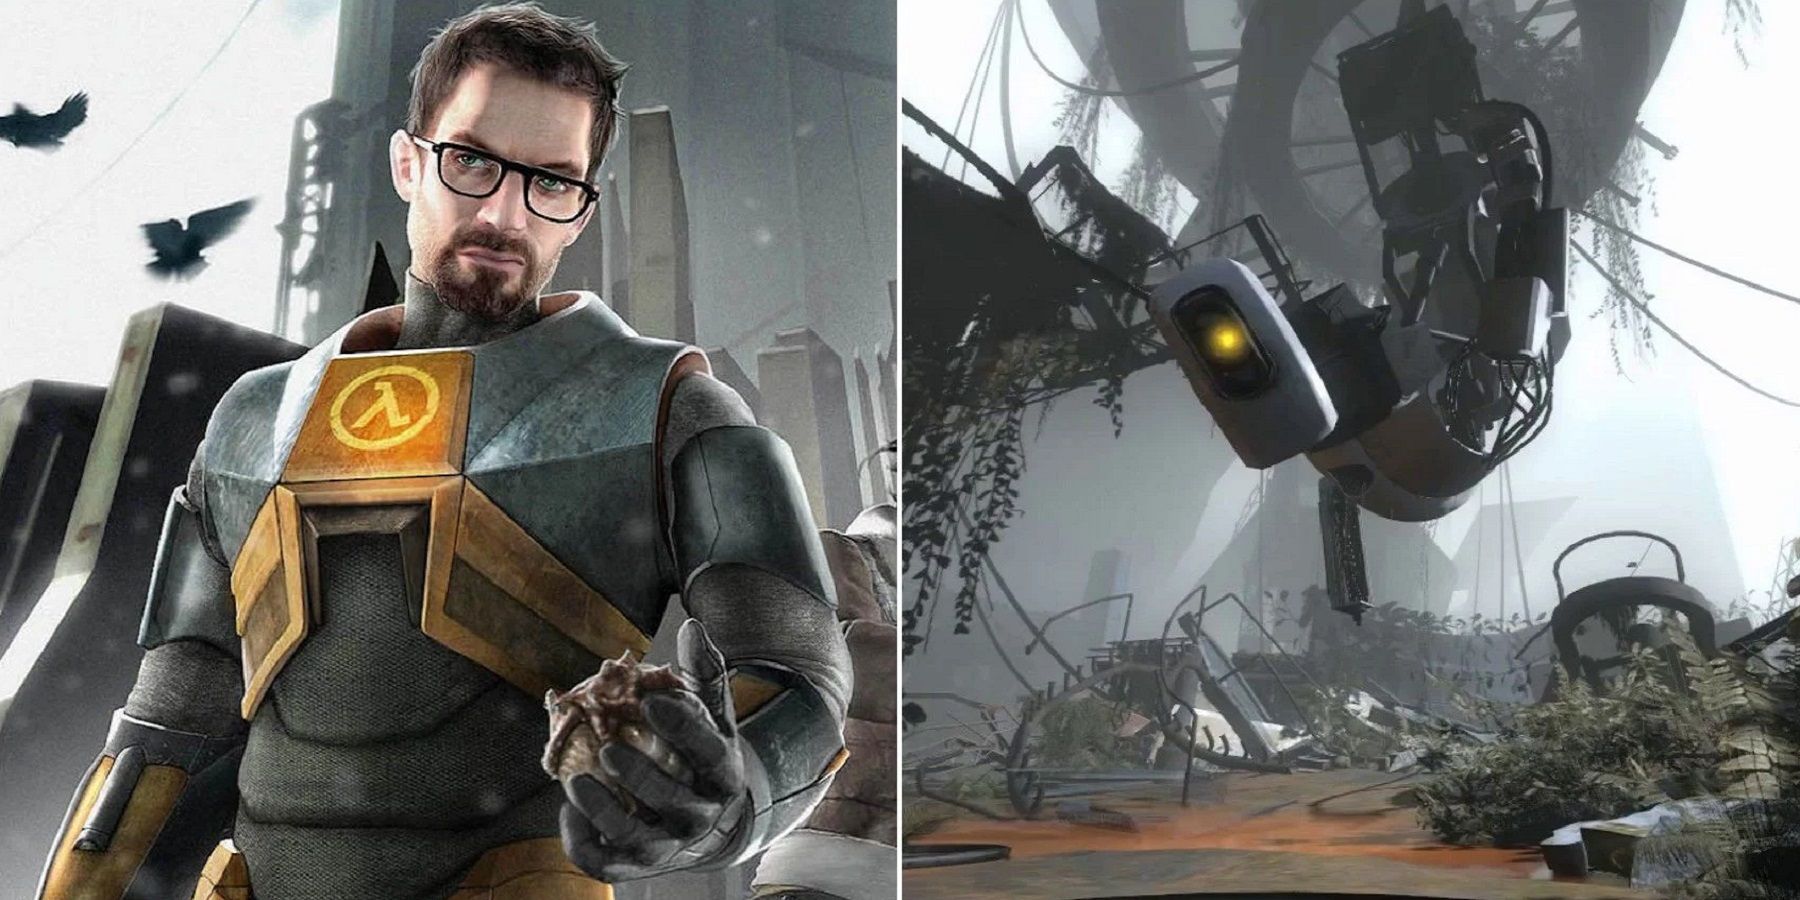 Split image showing Gordon Freeman from Half-Life 2 on the left, and GLaDOS from Portal 2 on the right.